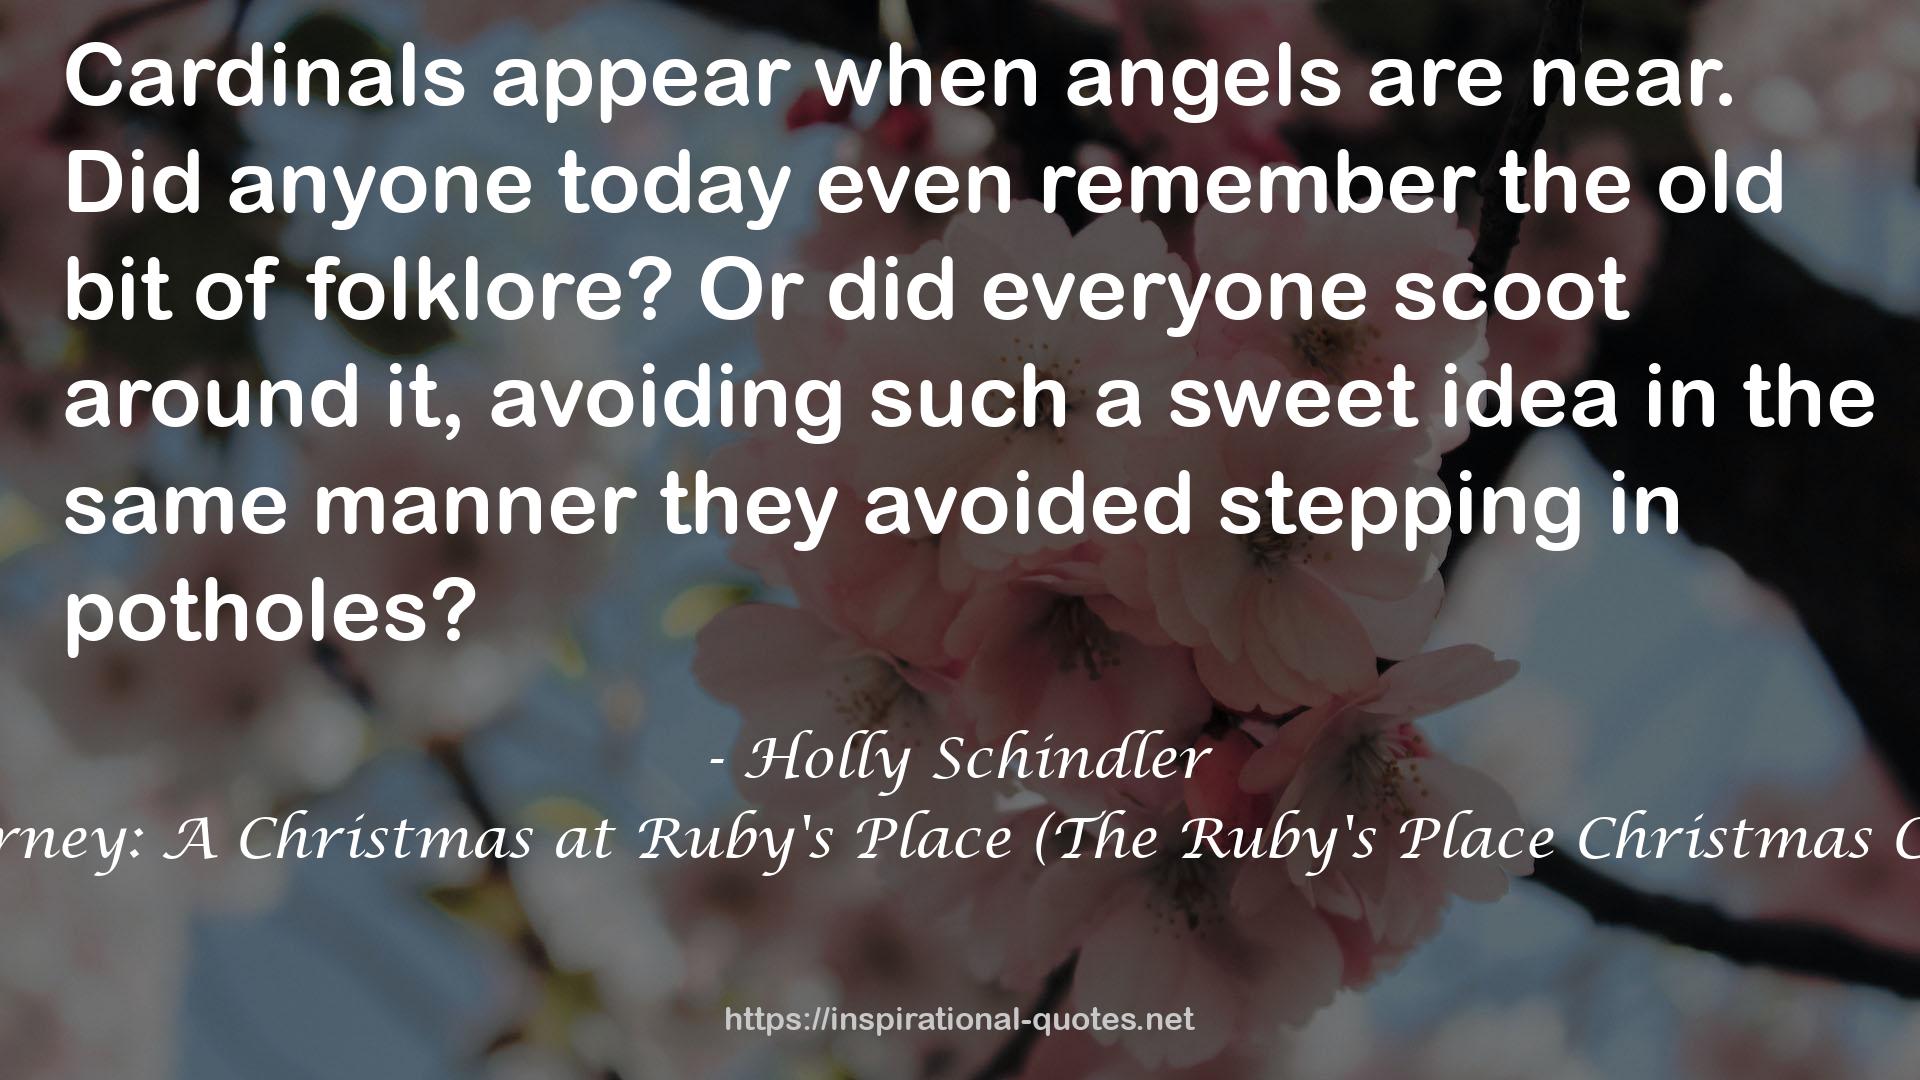 Sentimental Journey: A Christmas at Ruby's Place (The Ruby's Place Christmas Collection Book 3) QUOTES